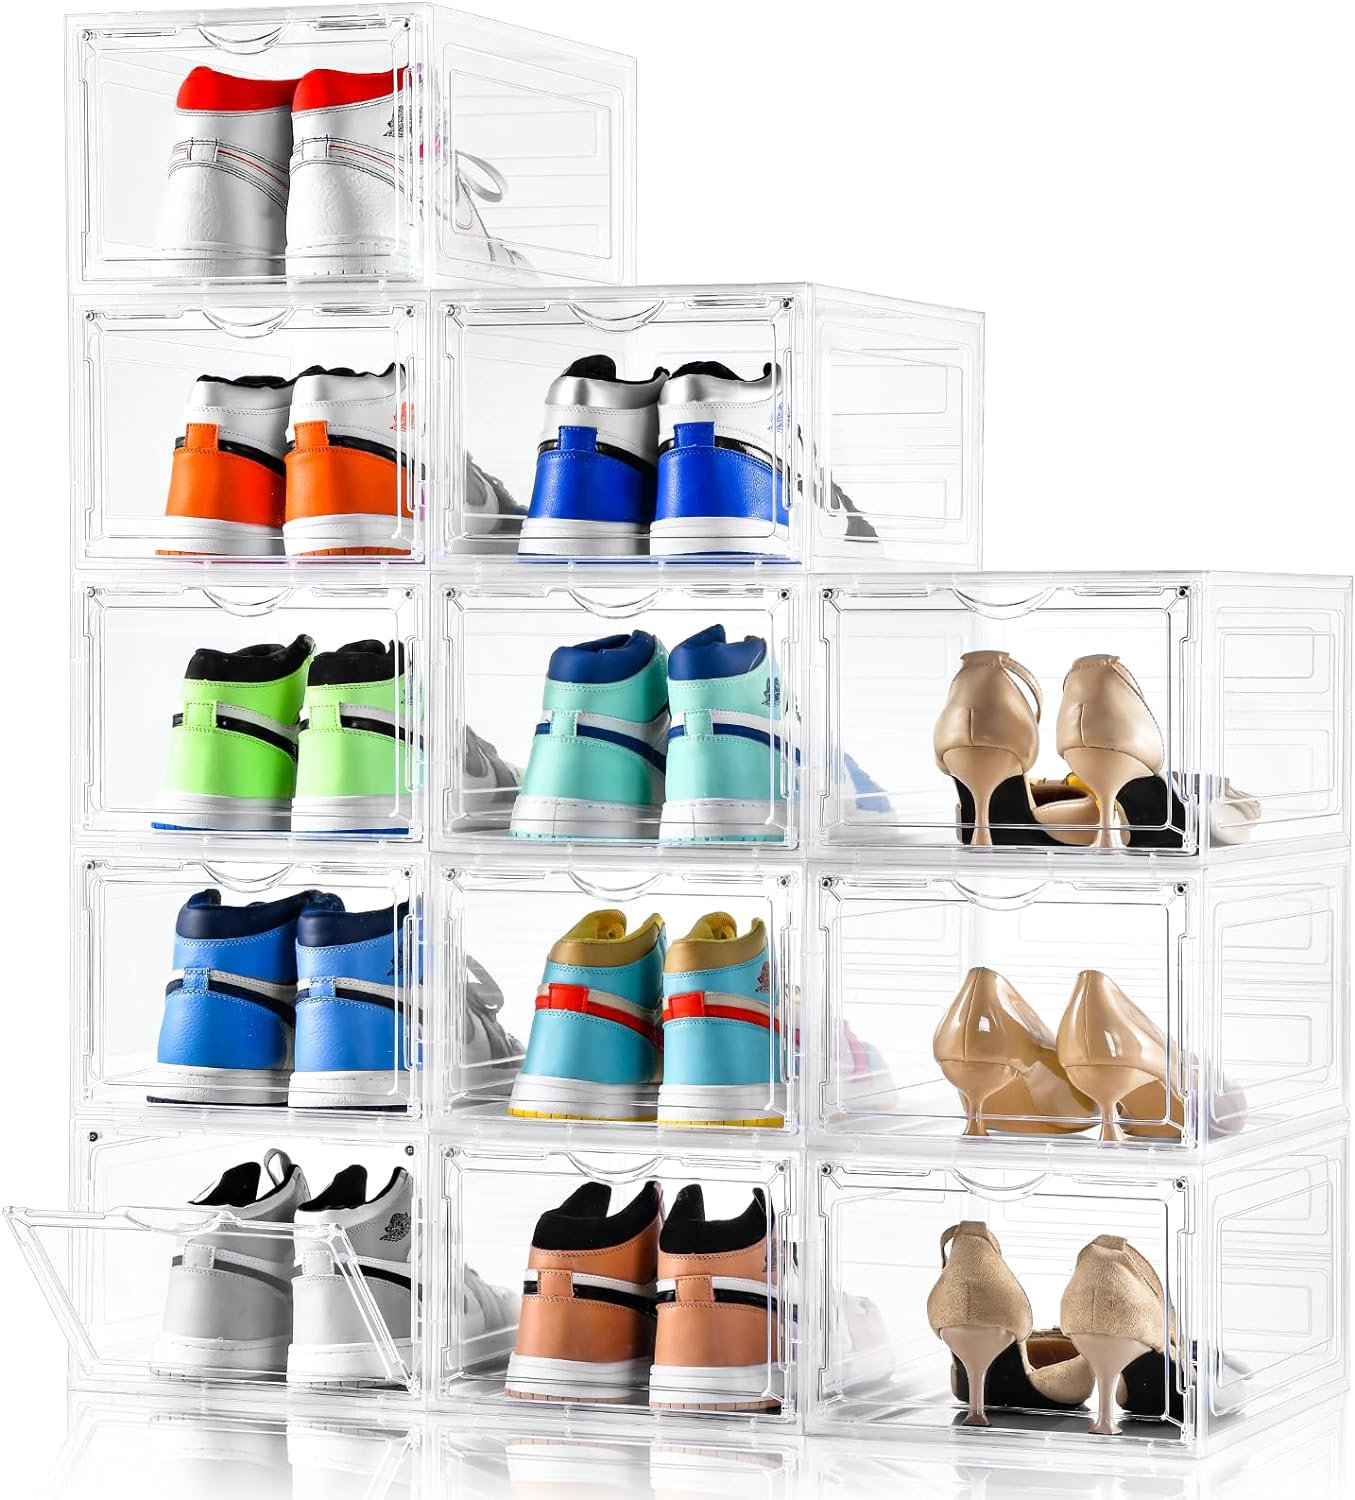 These shoe boxes are the best thing ever! Easy to snap together, sturdy, clear, stackable boxes with magnetic doors. My husband has so many pairs of running shoes and these boxes allow us to store them neatly in the garage!